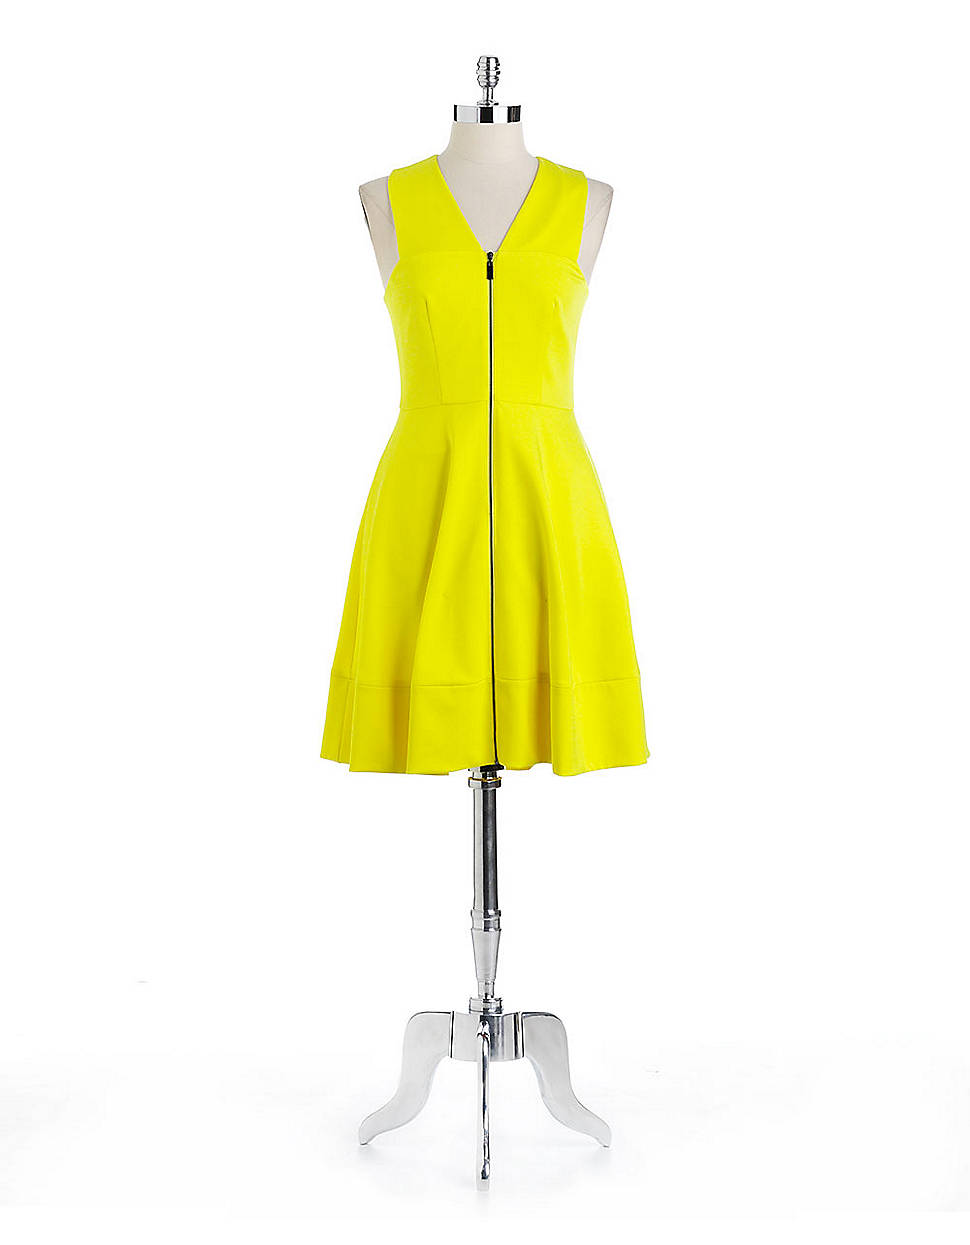 Vince Camuto Scuba Front Zip Dress in Yellow - Lyst